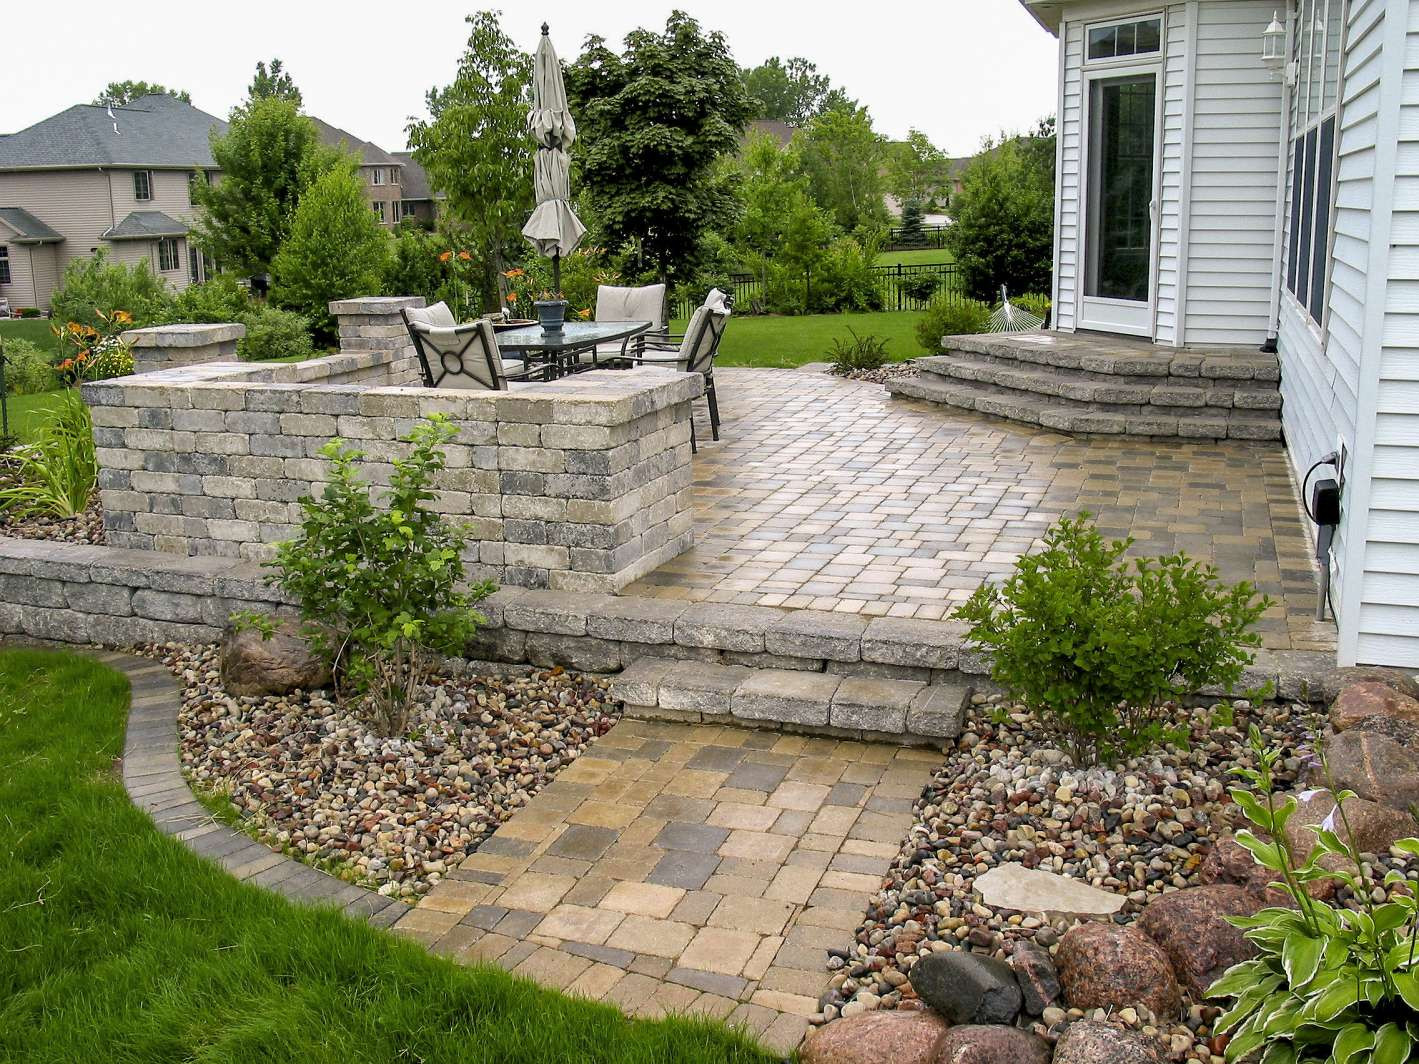 Patio And Landscaping
 Landscaping Design of Patios Walkways and Paths in